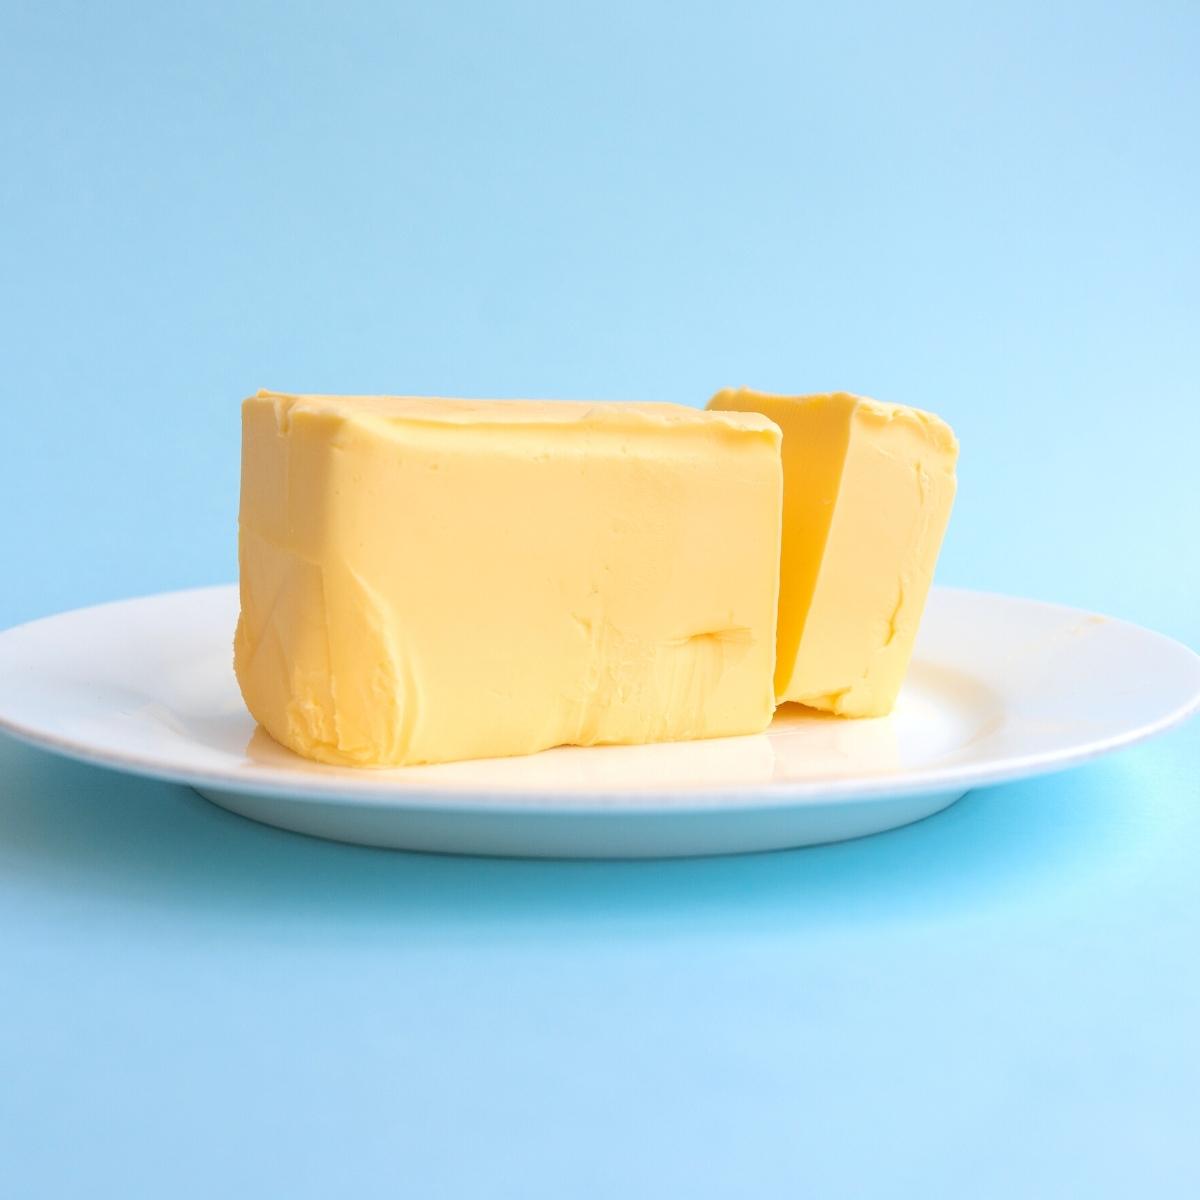 a stack of fresh cream butter on a white plate with a blue background.